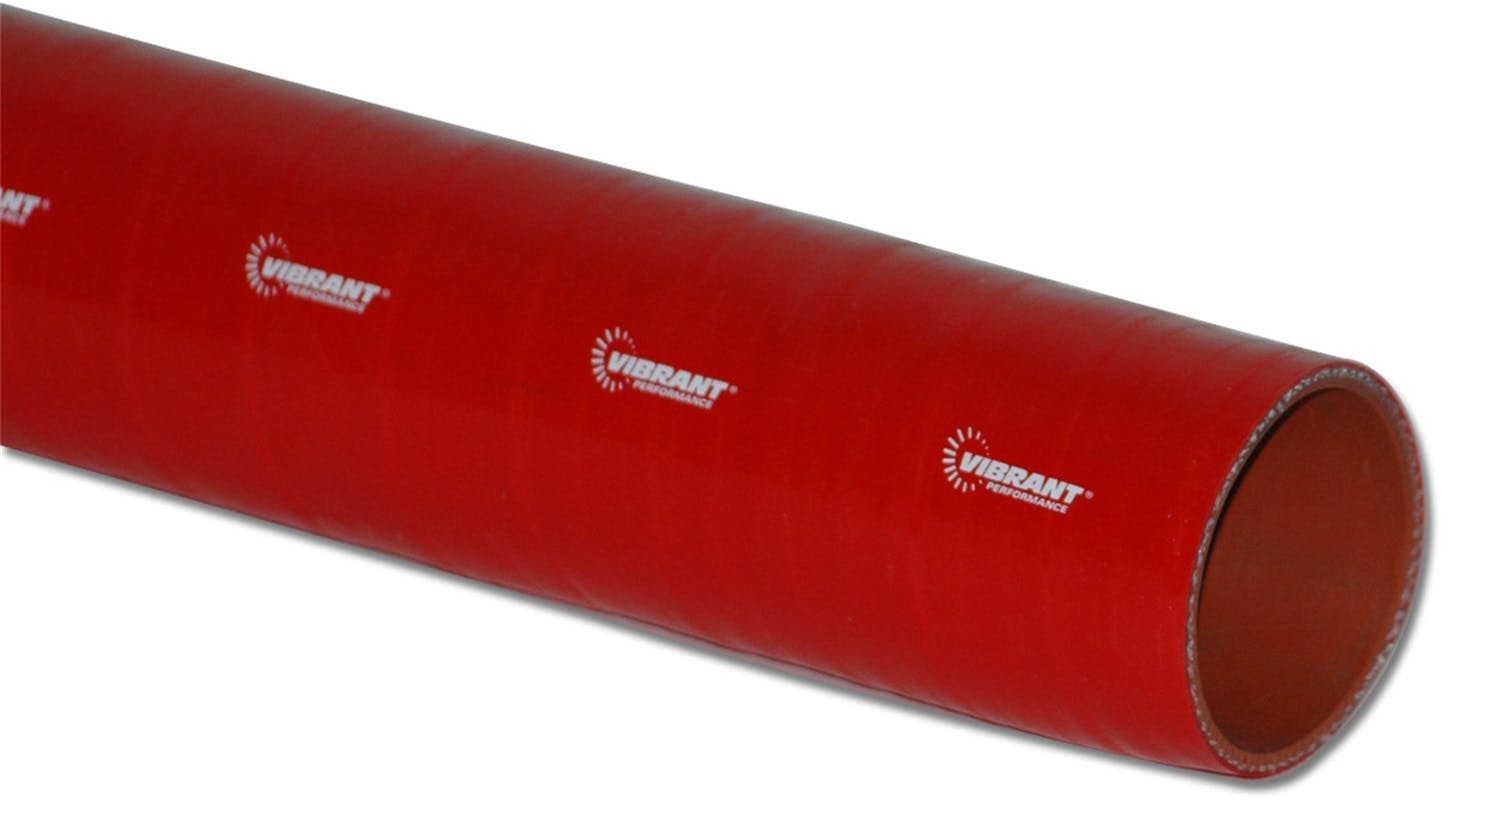 Vibrant Performance 27131R 4 Ply Silicone Sleeve, 2.75 inch I.D. x 12 inch Long - Red